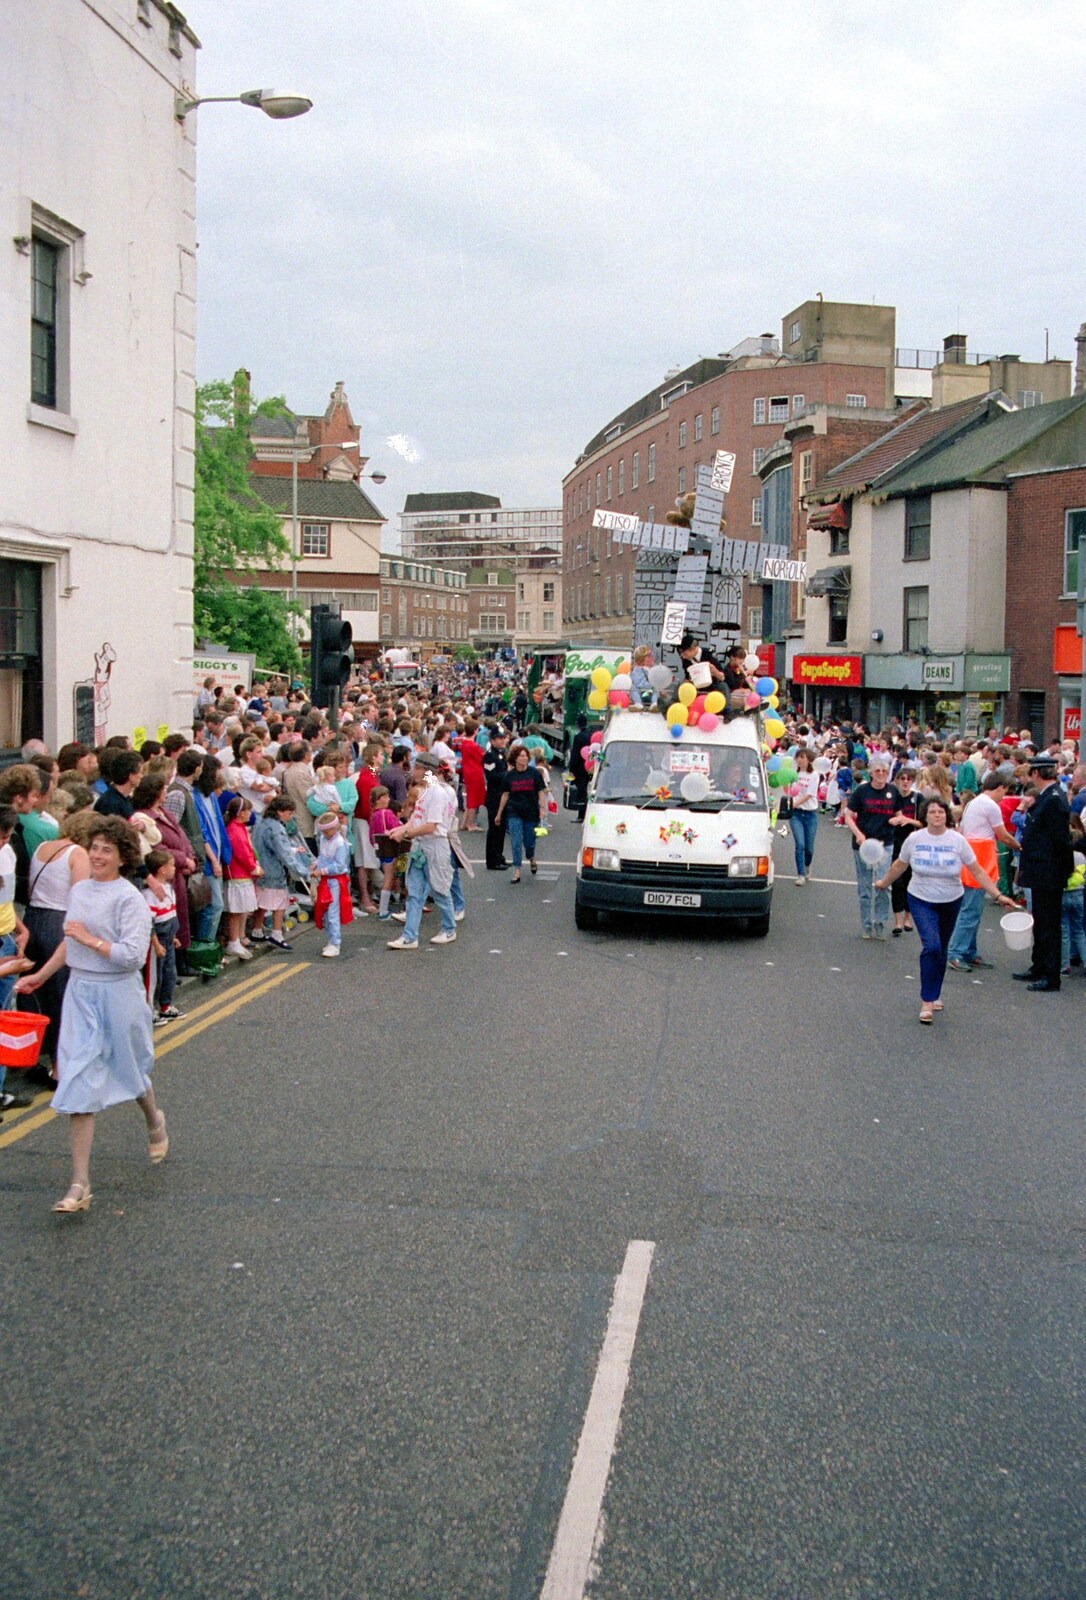 Big crowds on St. Stephen's from Soman-Wherry and the Lord Mayor's Parade, Norwich - 3rd May 1988